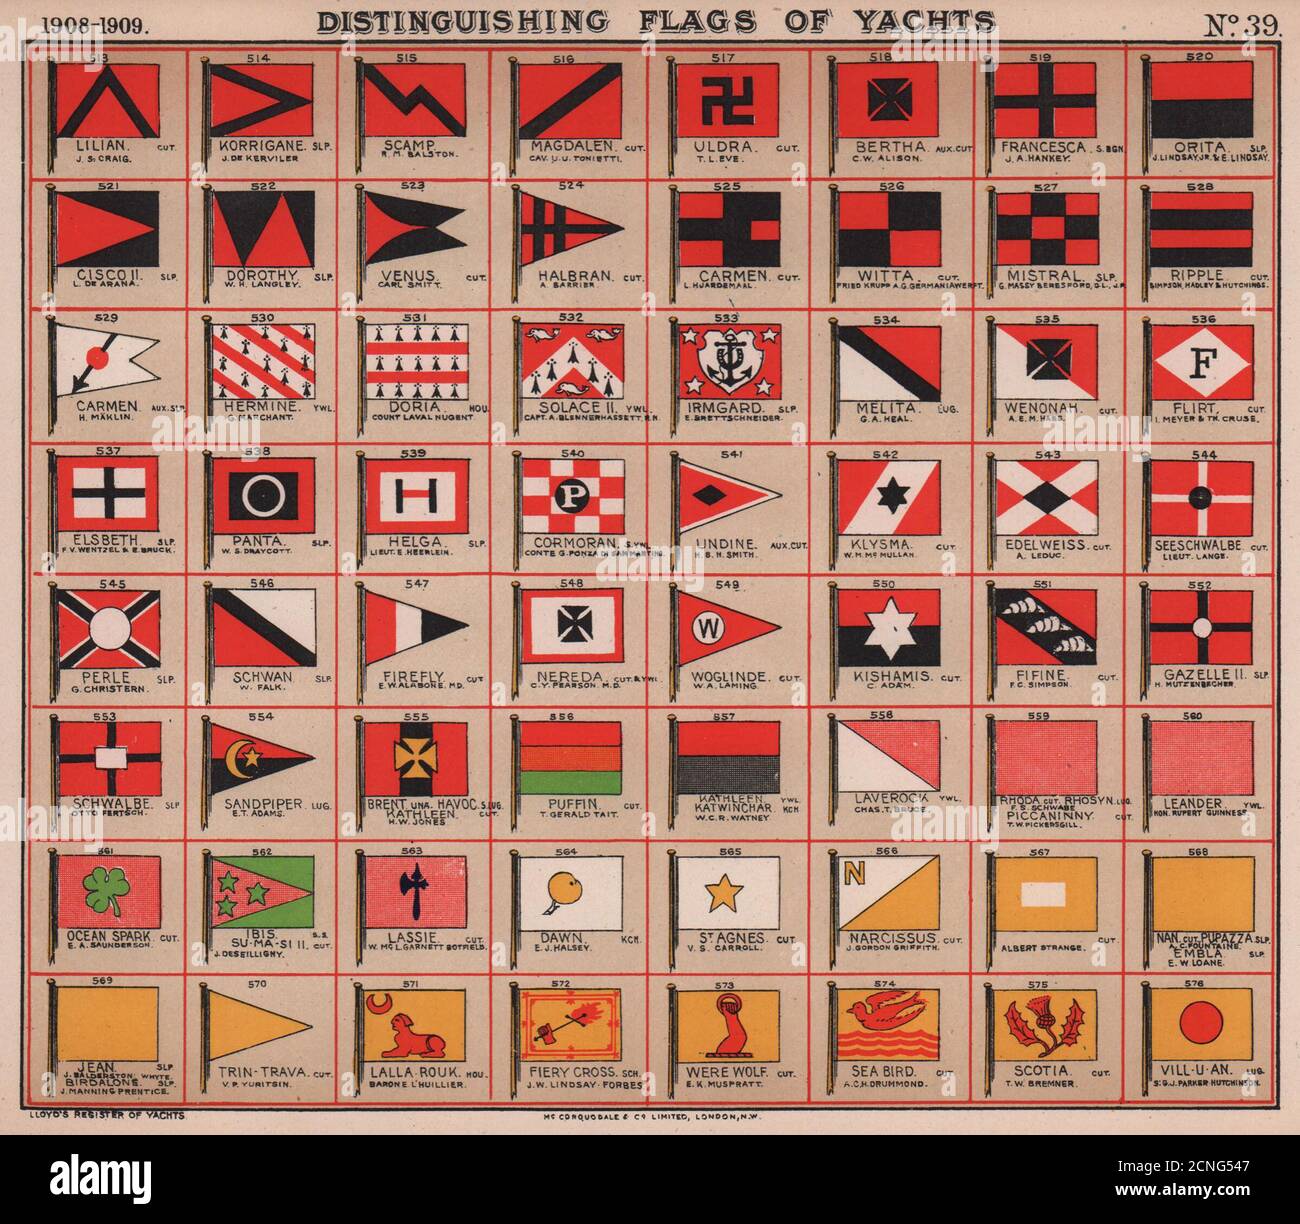 YACHT FLAGS. Red & Black. Red & Yellow. Red White & Black. Salmon 1908 print Stock Photo